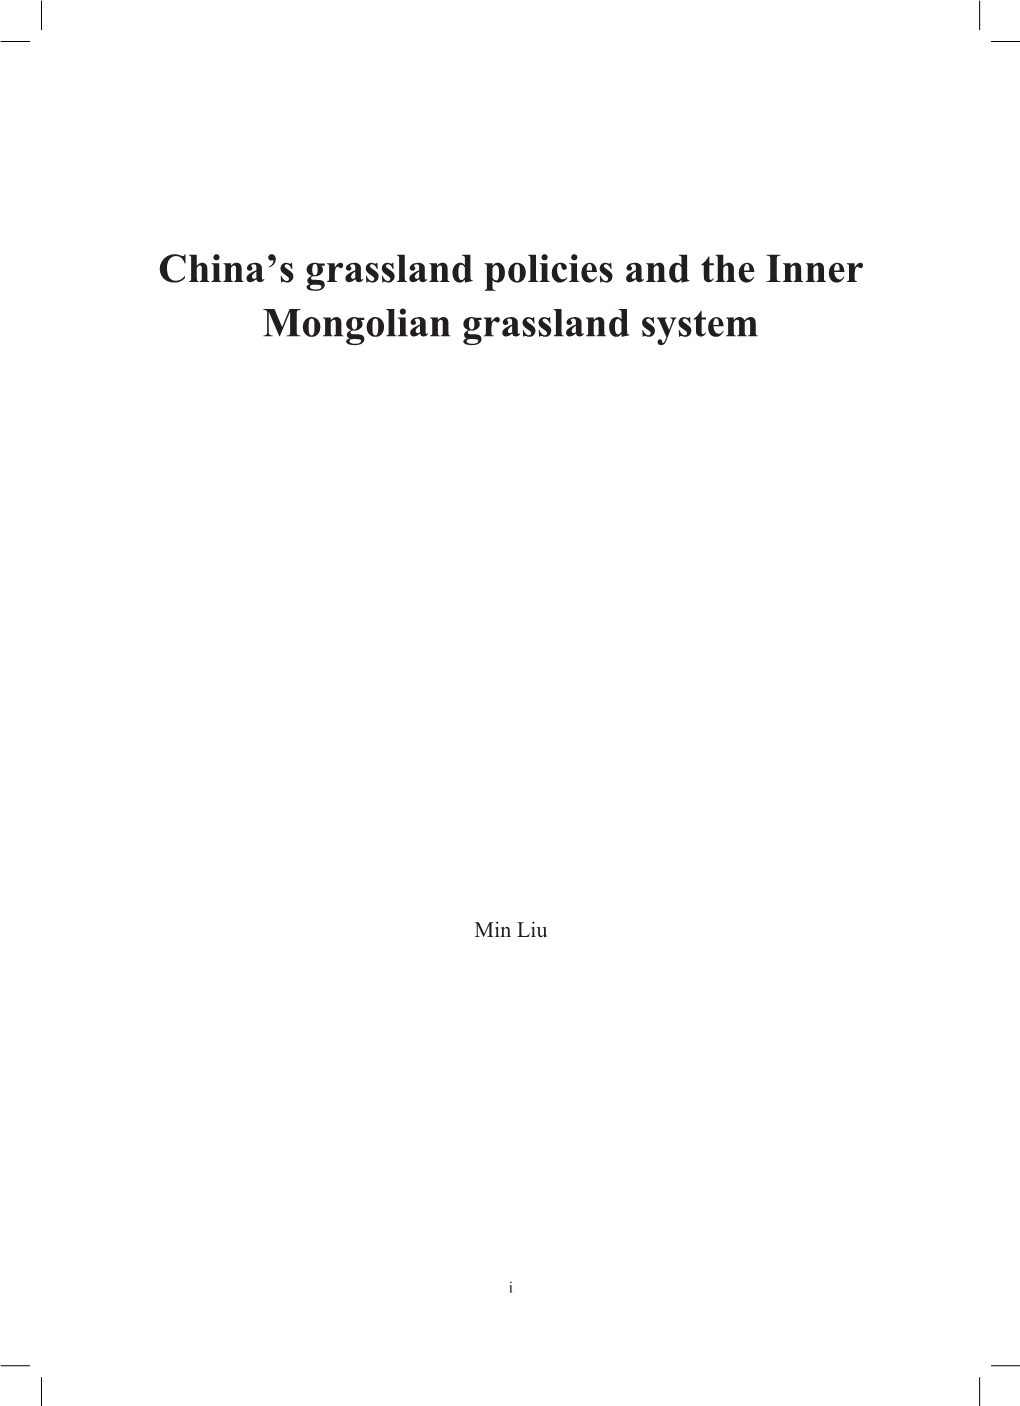 China's Grassland Policies and the Inner Mongolian Grassland System